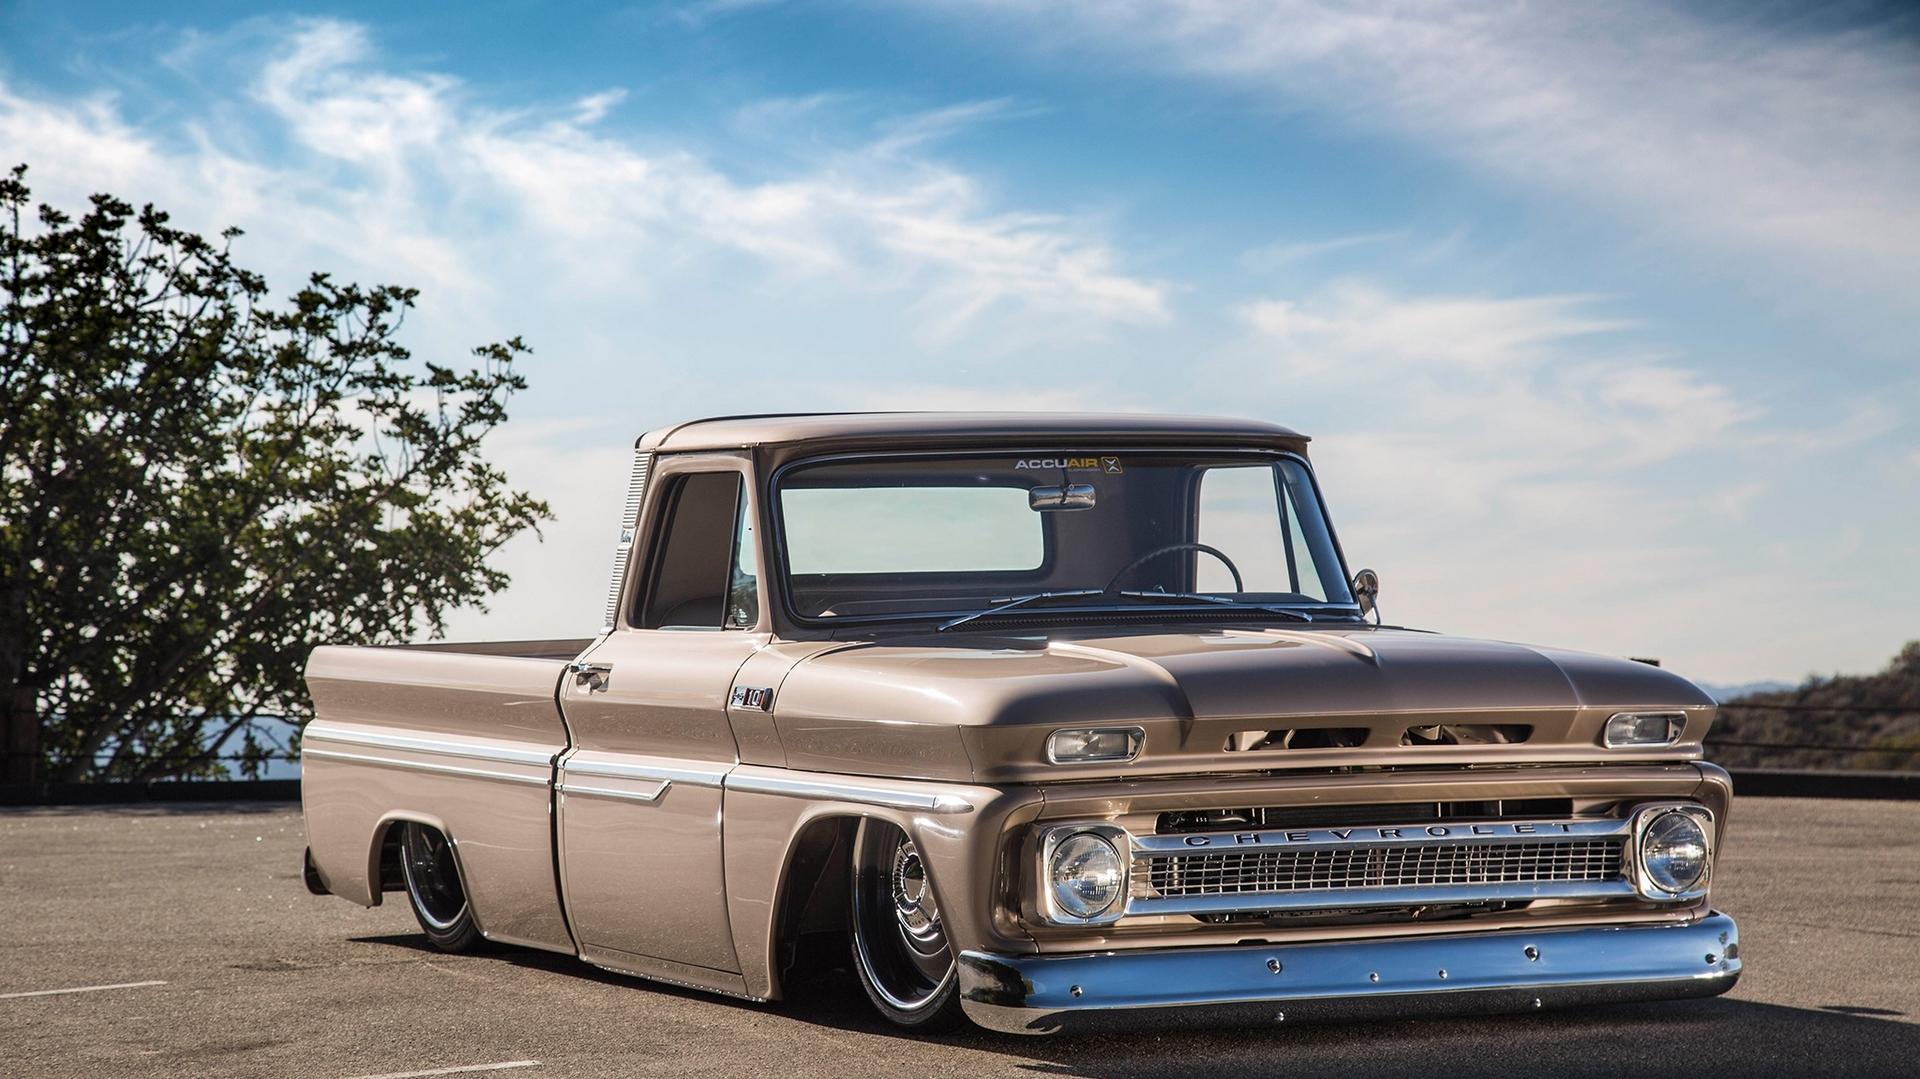 Classic Bowtie Lowered Truck Rare Gallery HD Wallpaper